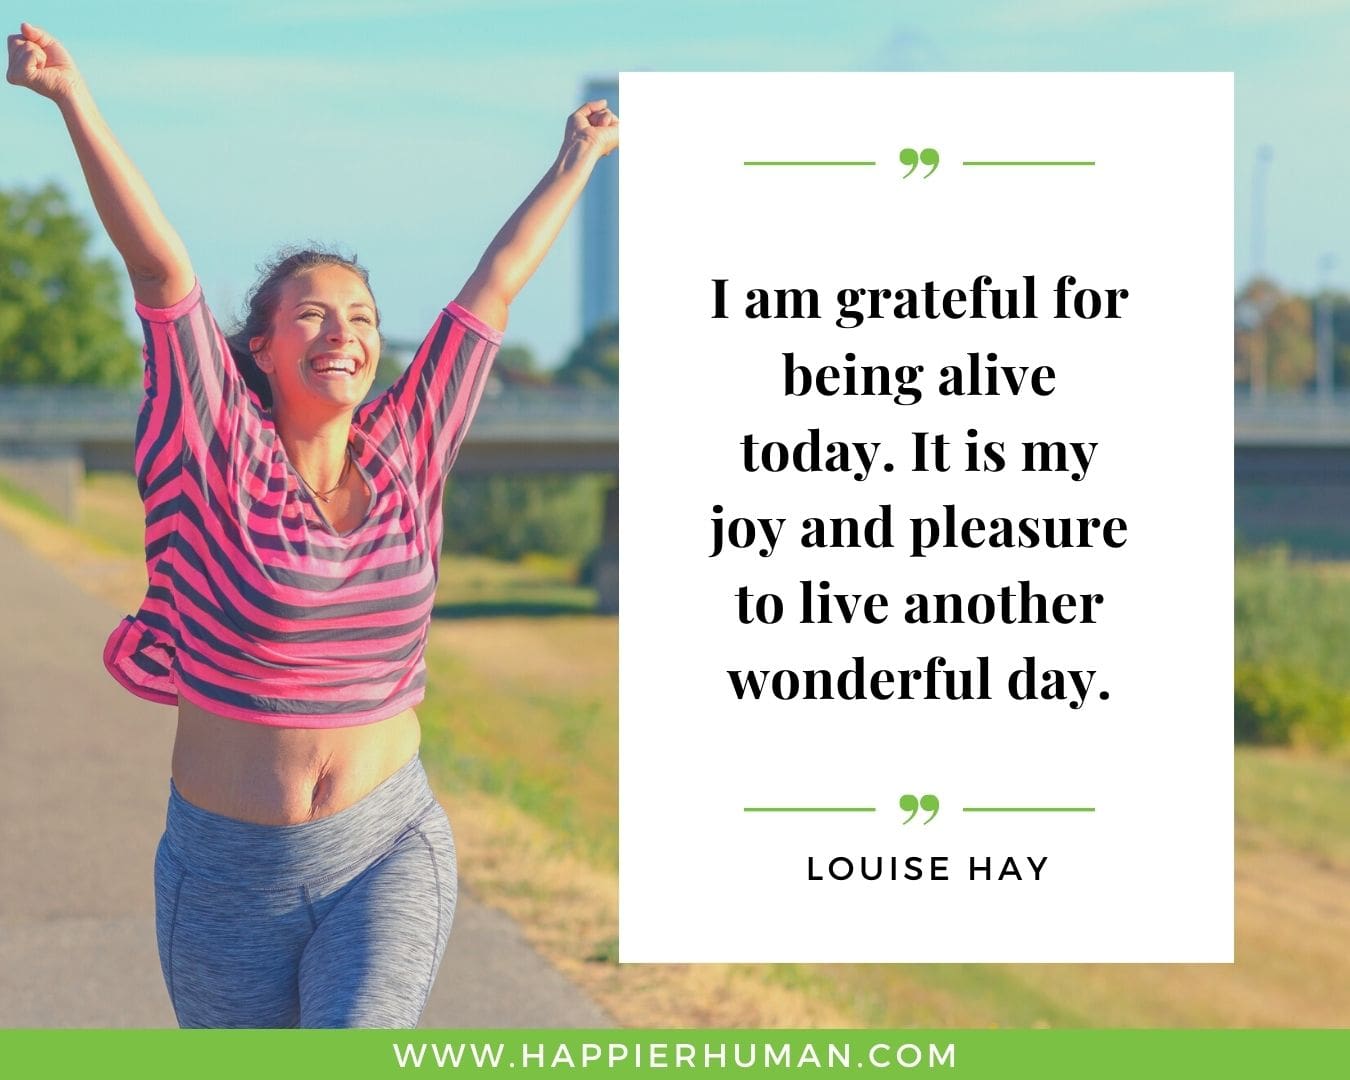 Great Day Quotes - “I am grateful for being alive today. It is my joy and pleasure to live another wonderful day.” – Louise Hay